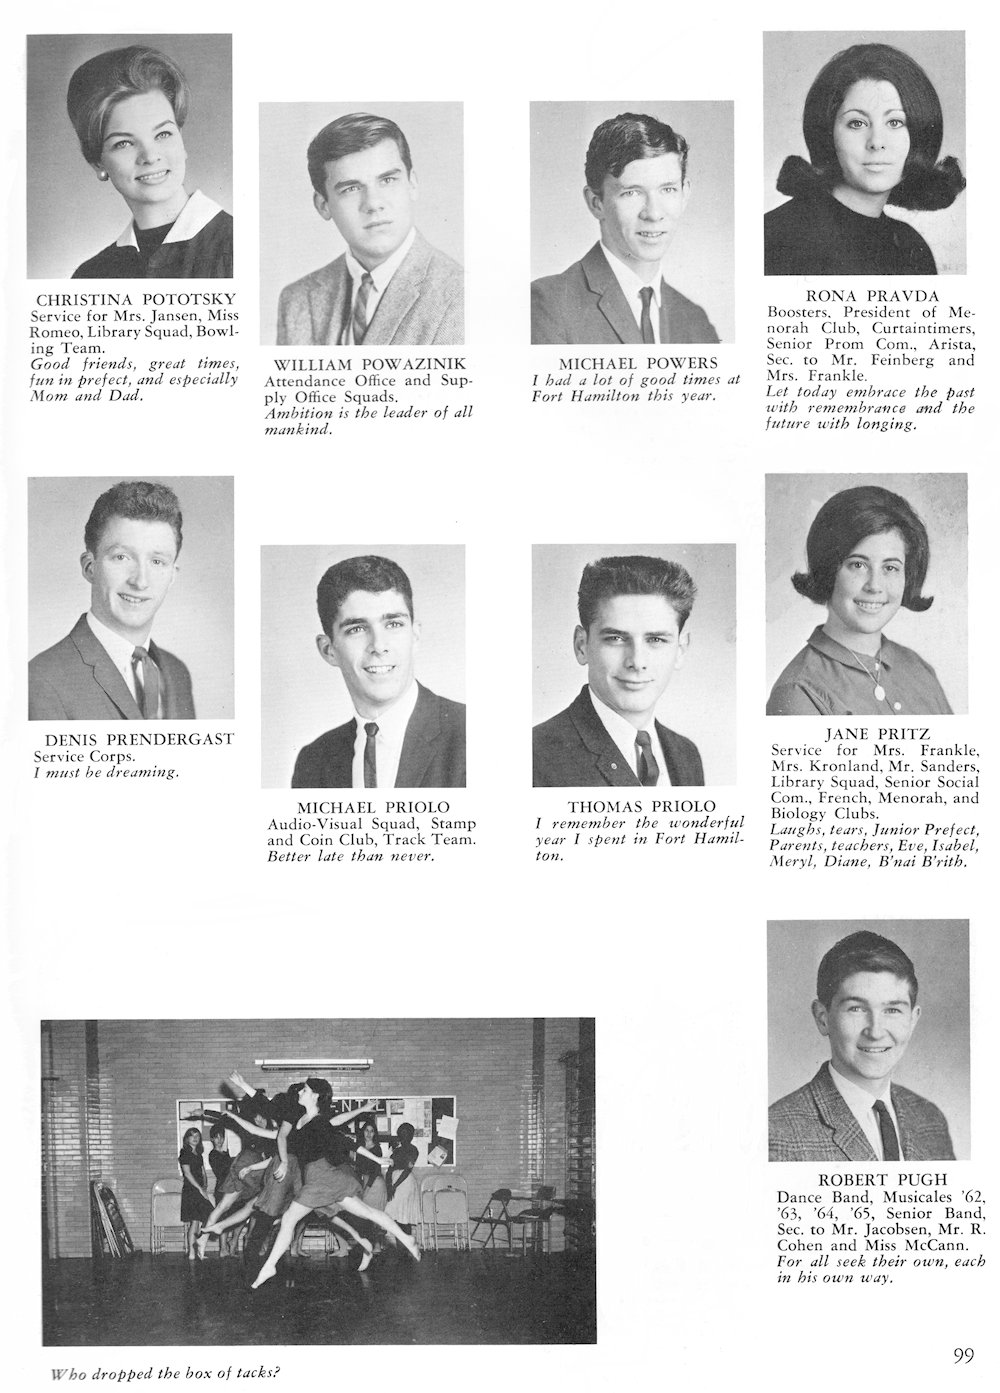 Pototsky-Pugh page from Fort Hamilton High School 1965